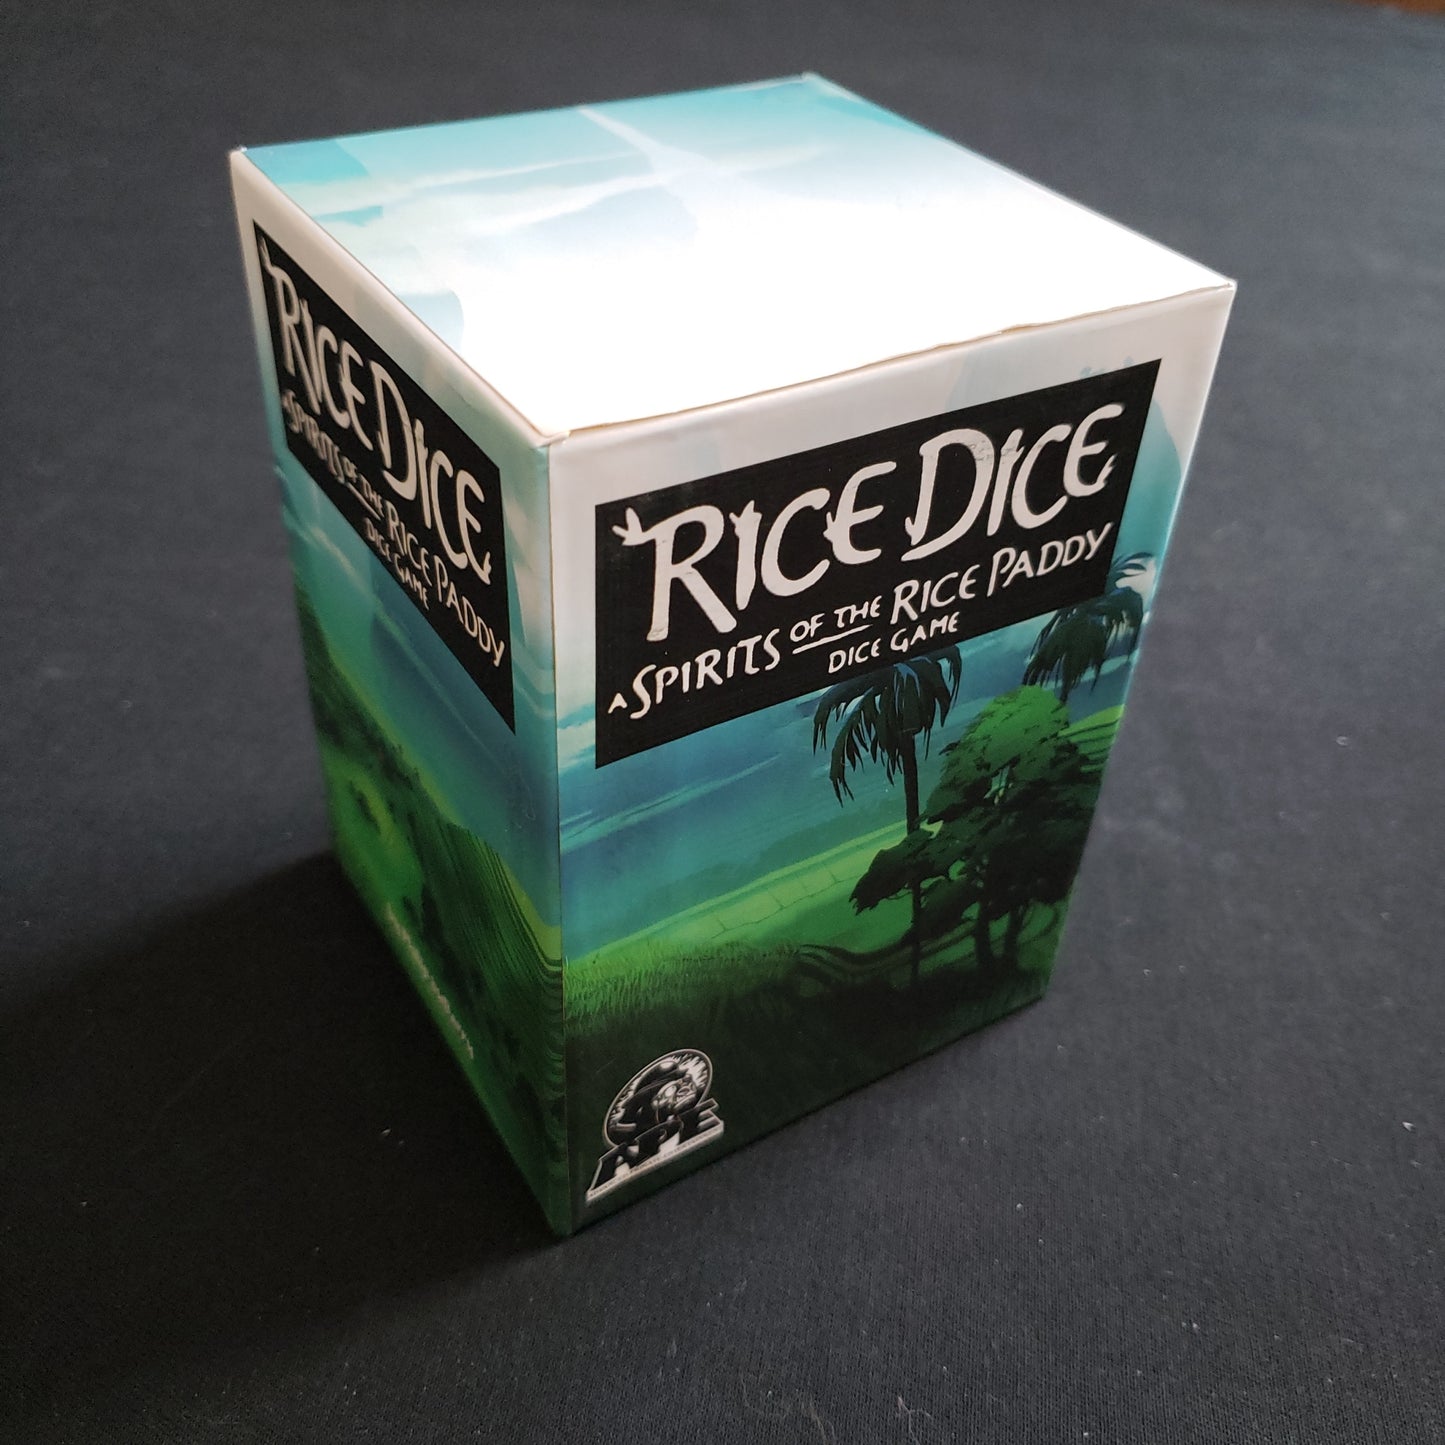 Image shows the front cover of the box of the Rice Dice board game